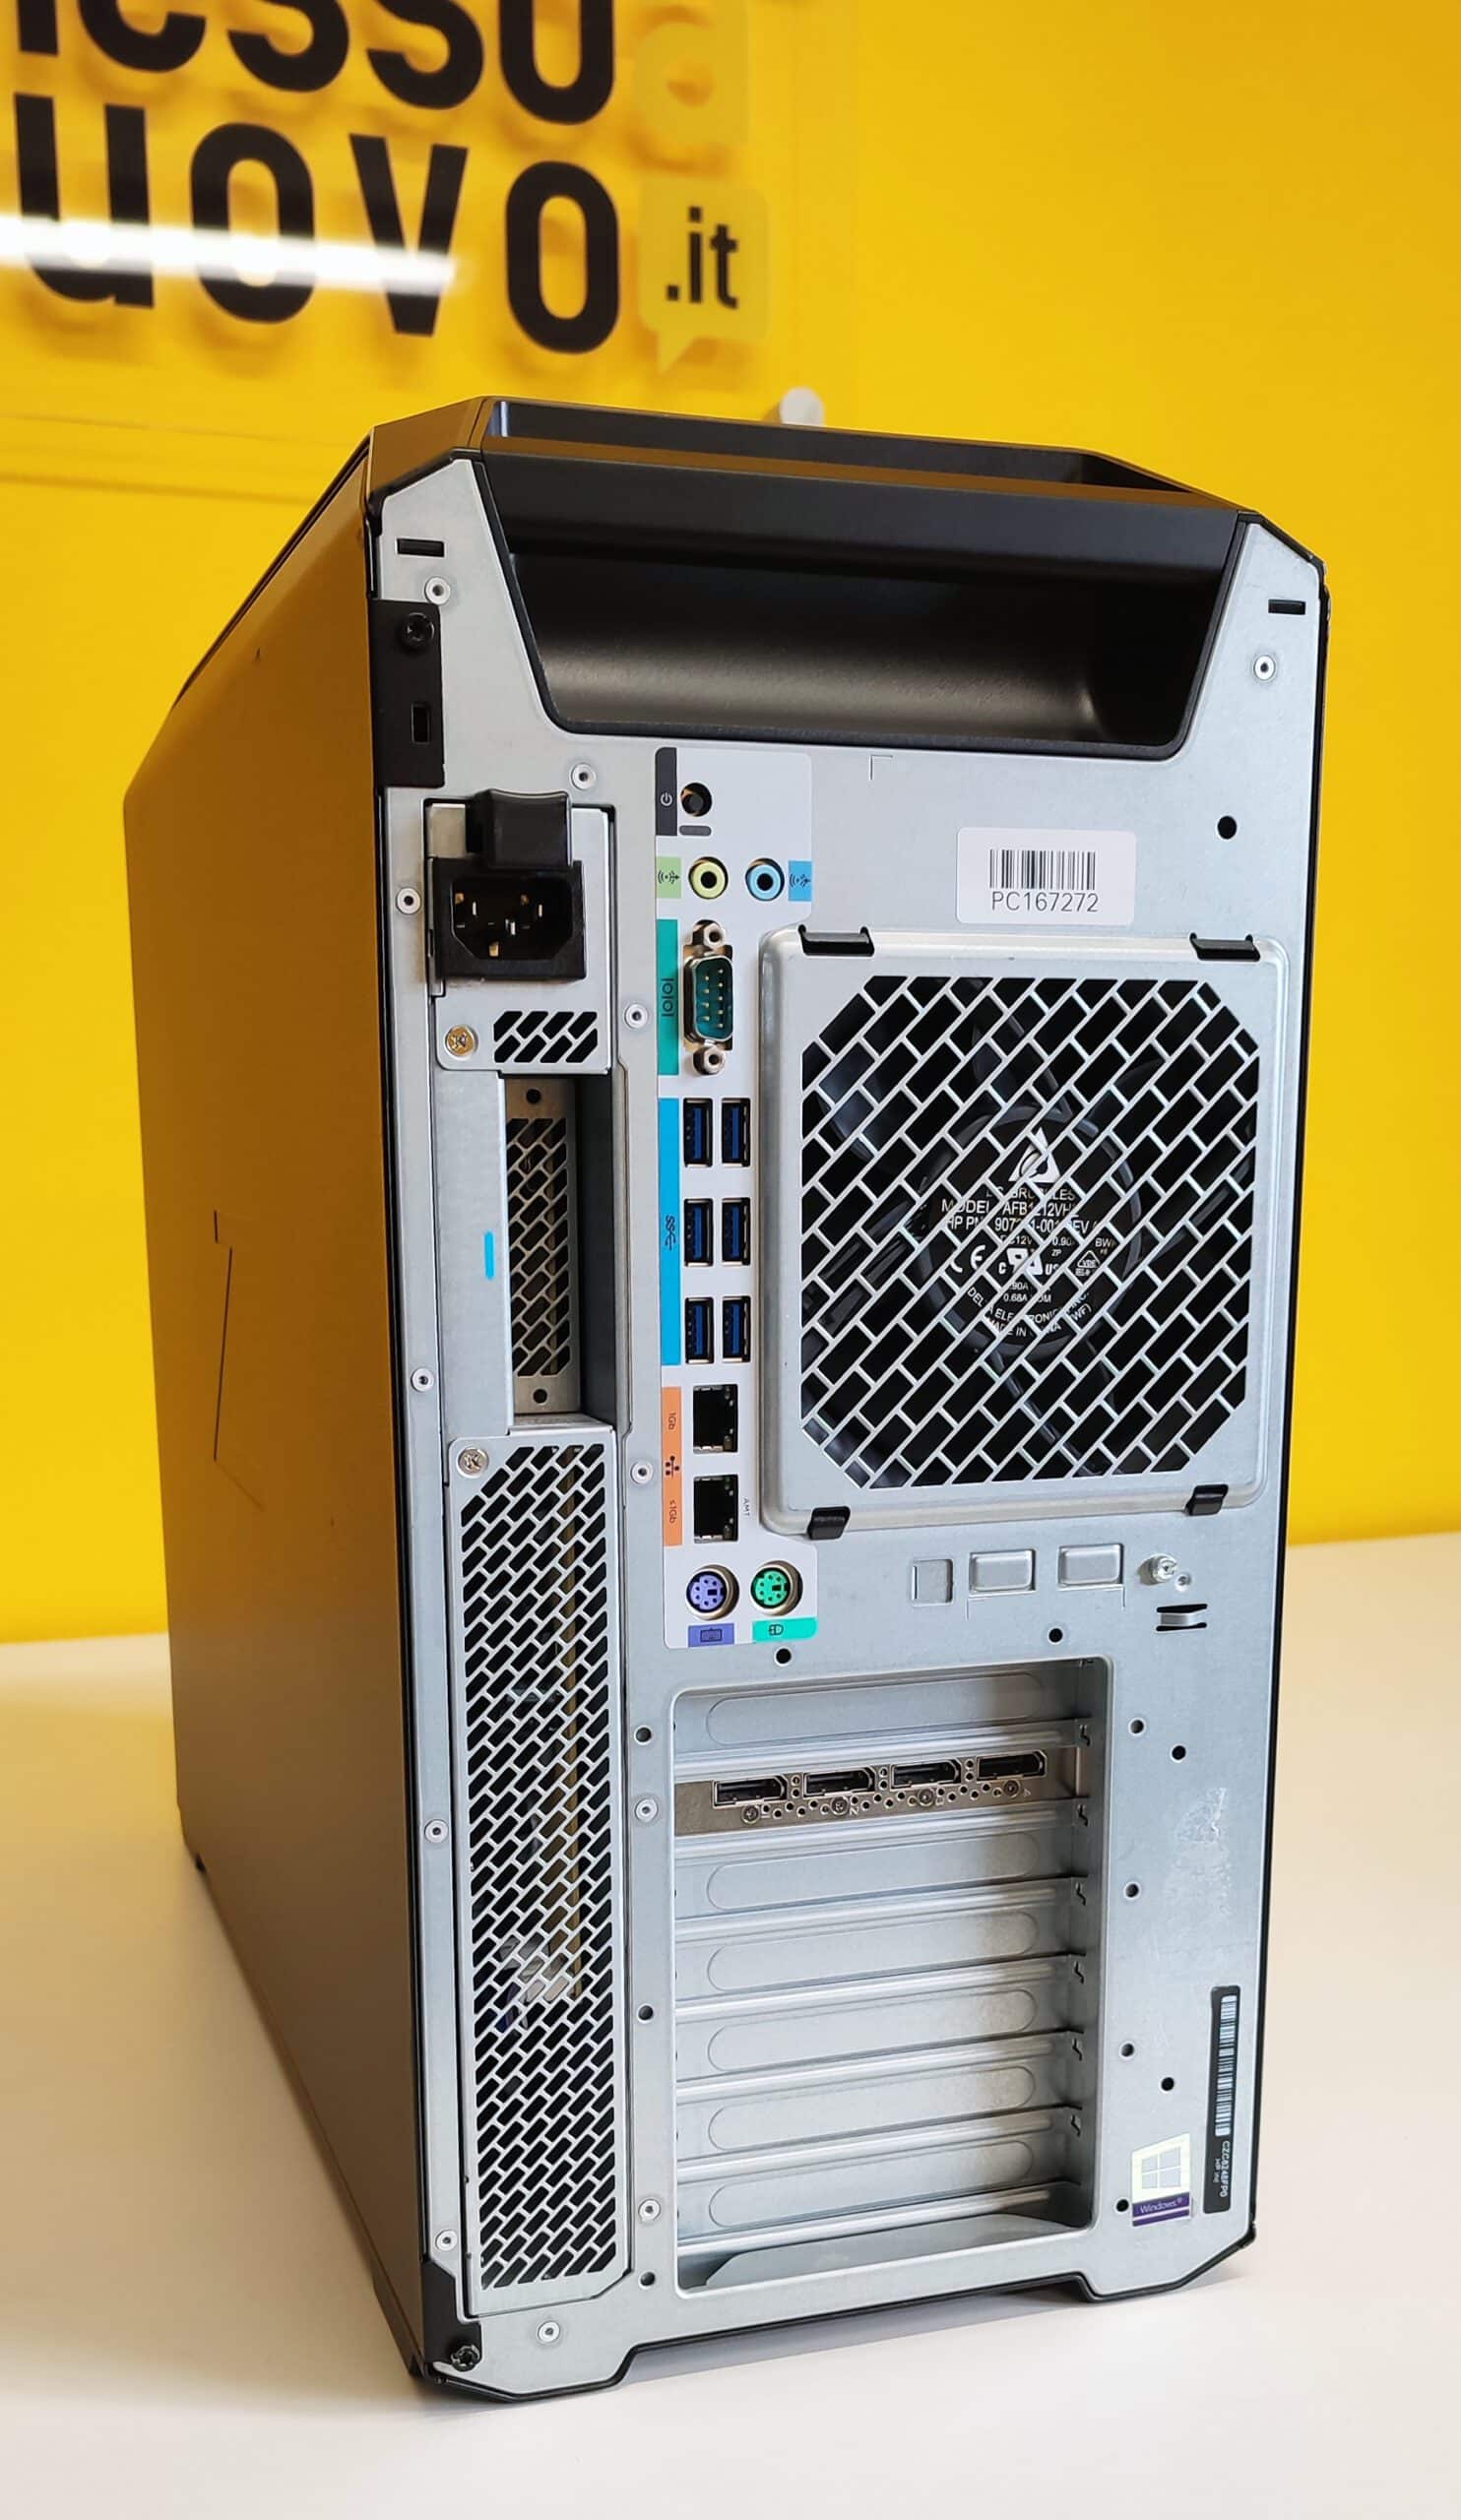 HP Z8 G4 Workstation Tower | 2x Intel Xeon Silver 4114 20Cores | Ram 256Gb | SSD 2Tb nvme + HDD 20TB | Nvidia RTX | Windows 11 Pro Power and Reliability for Professionals 